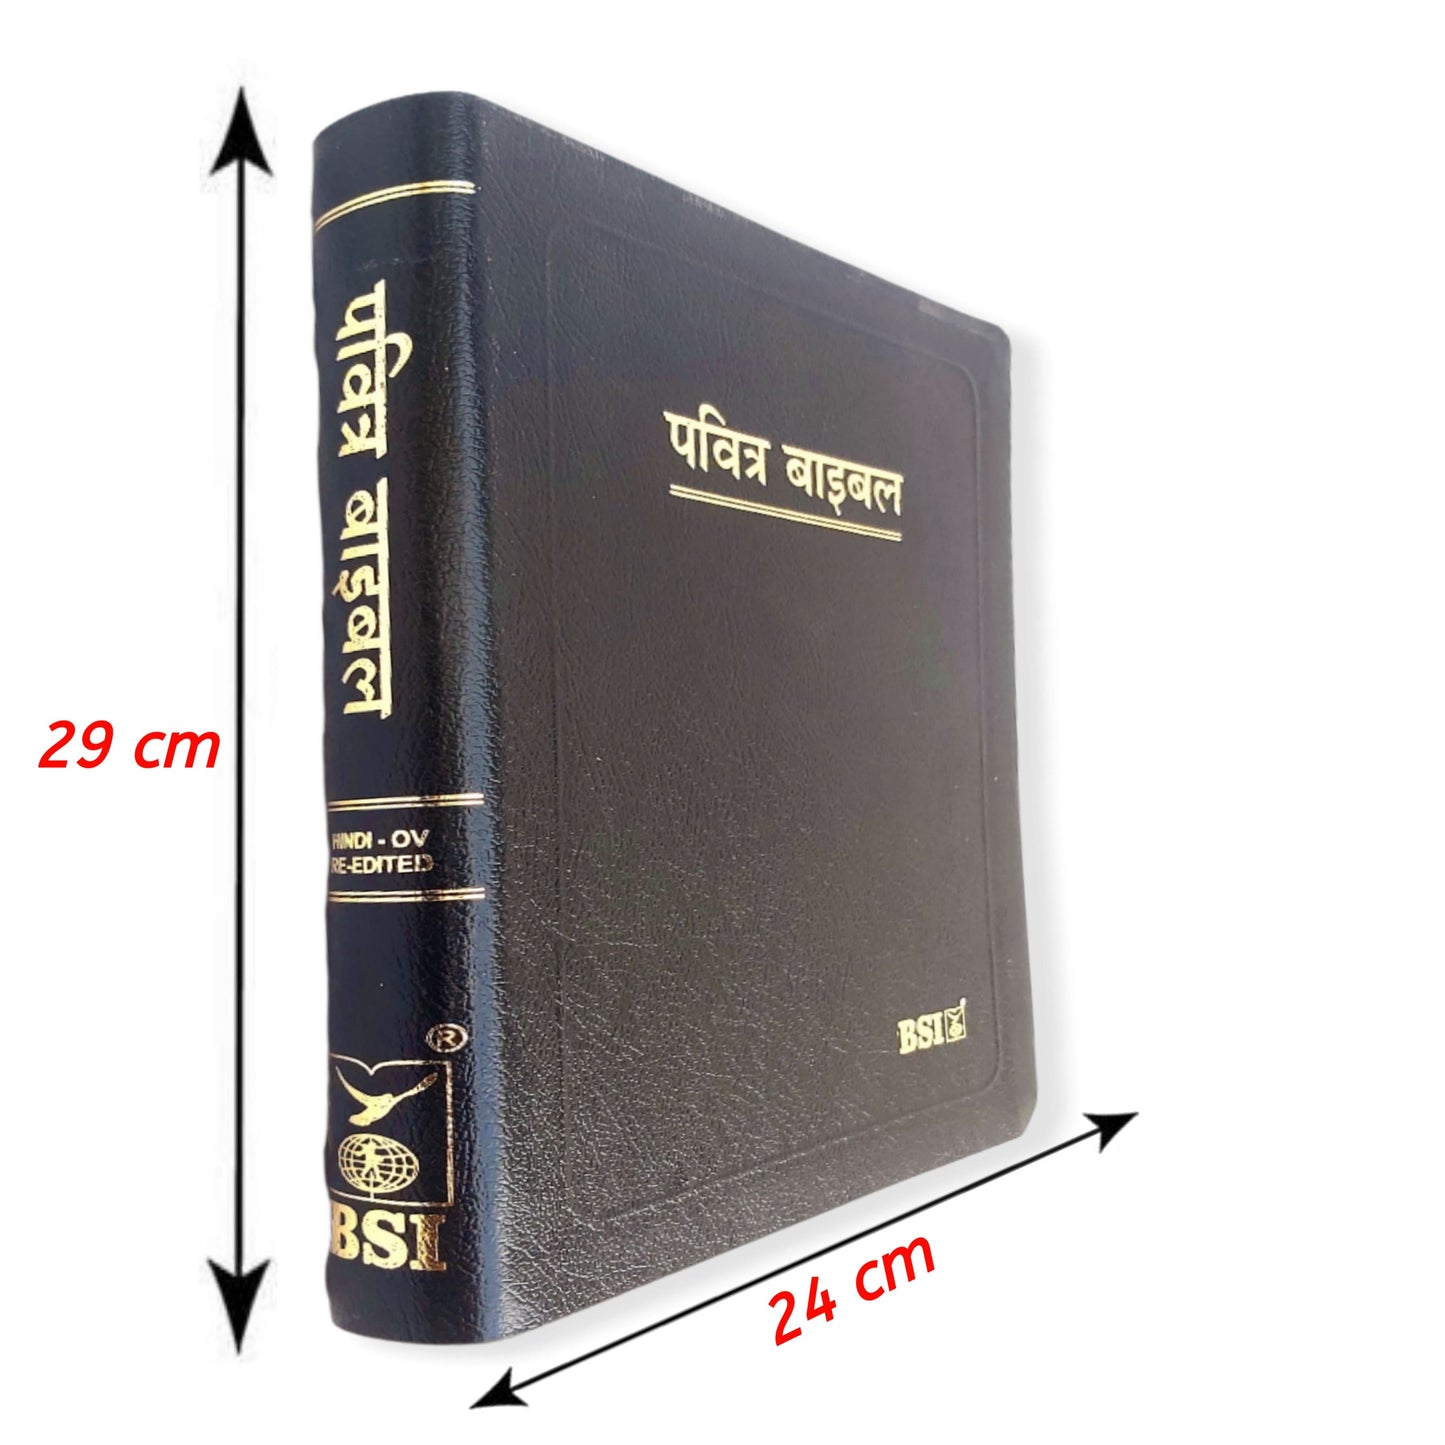 The Holy Pulpit Big Letter Golden Edge Bible Hindi Leather Cover